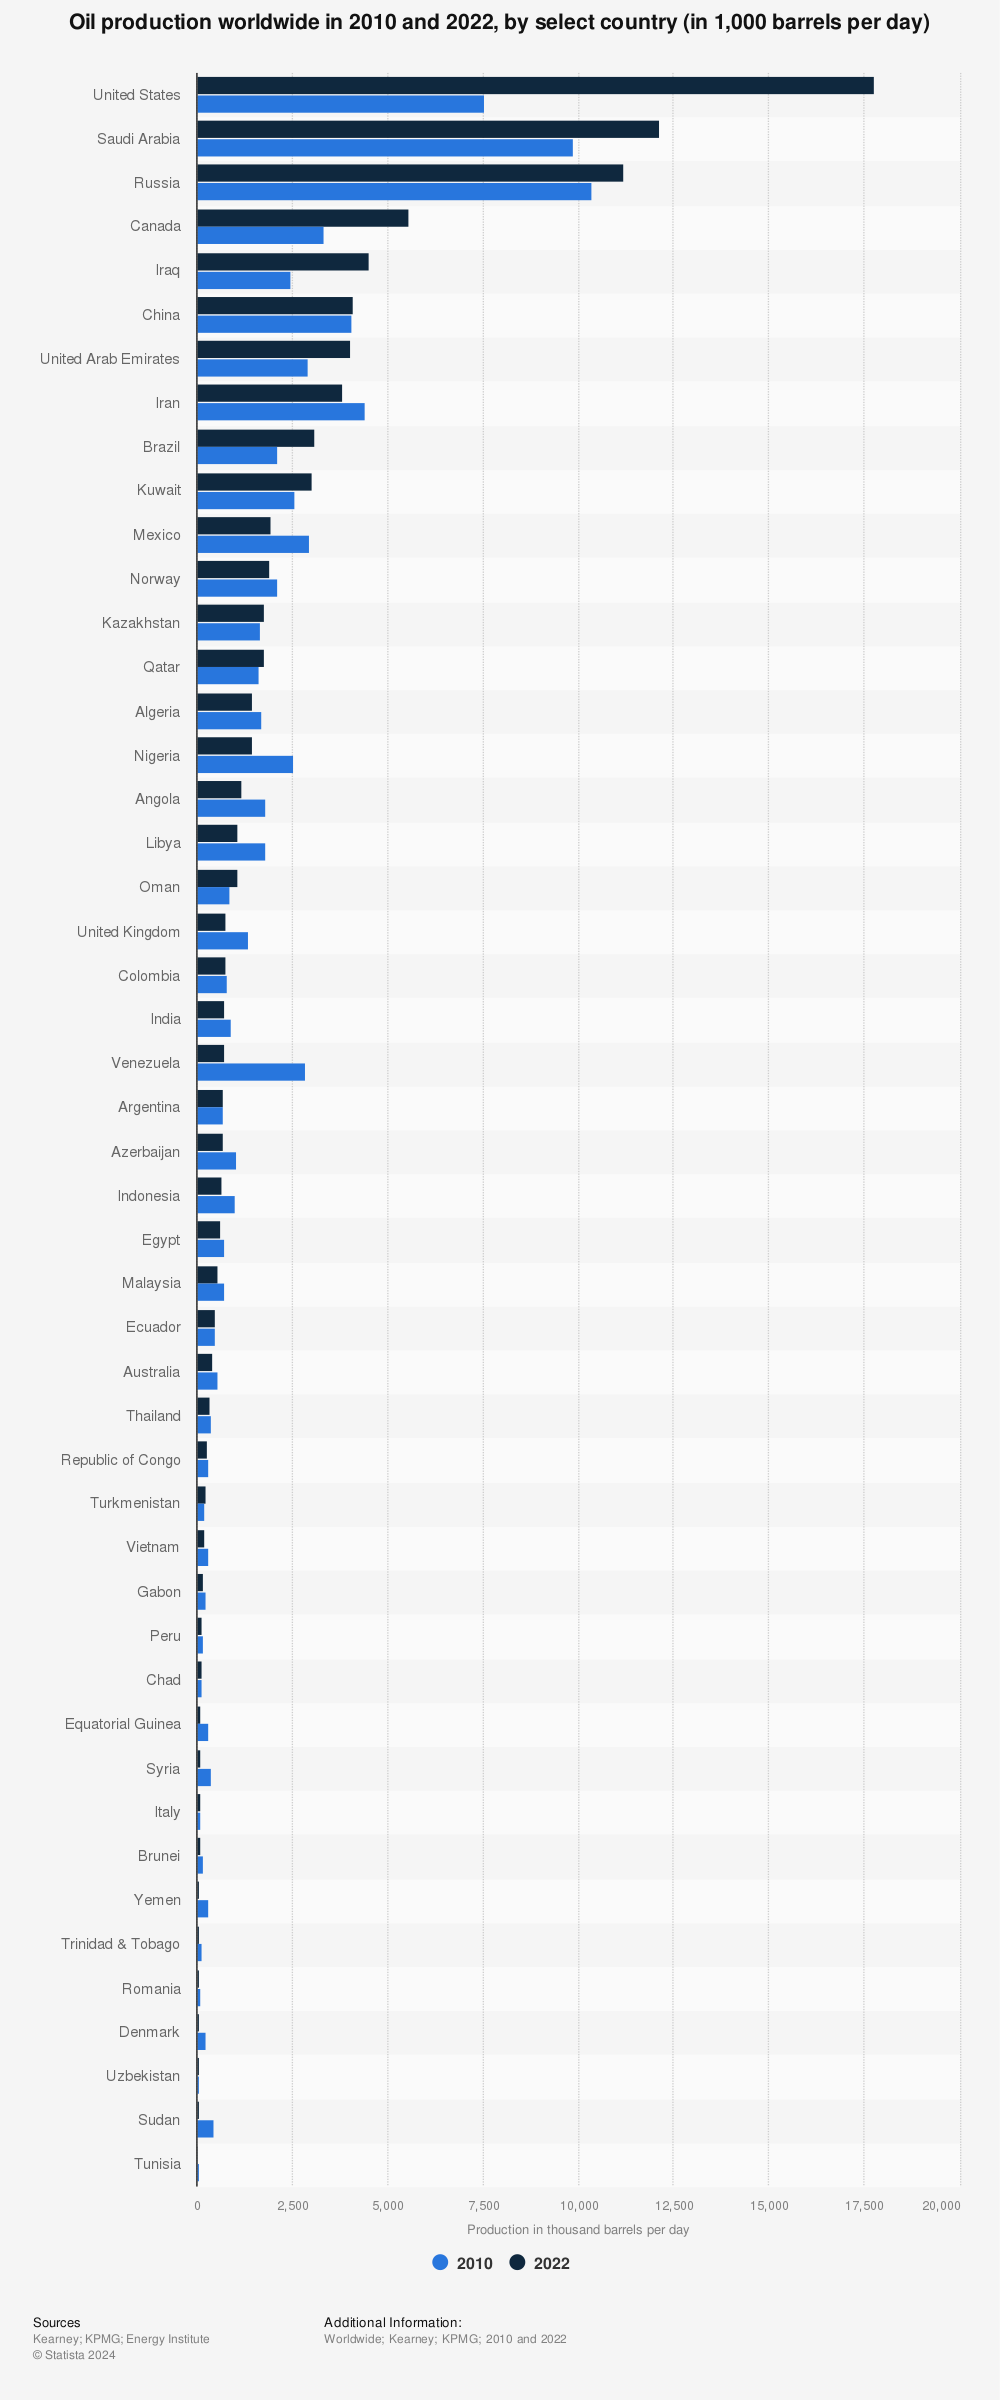 Statistic: Oil production worldwide in 2010 and 2022, by select country (in 1,000 barrels per day) | Statista